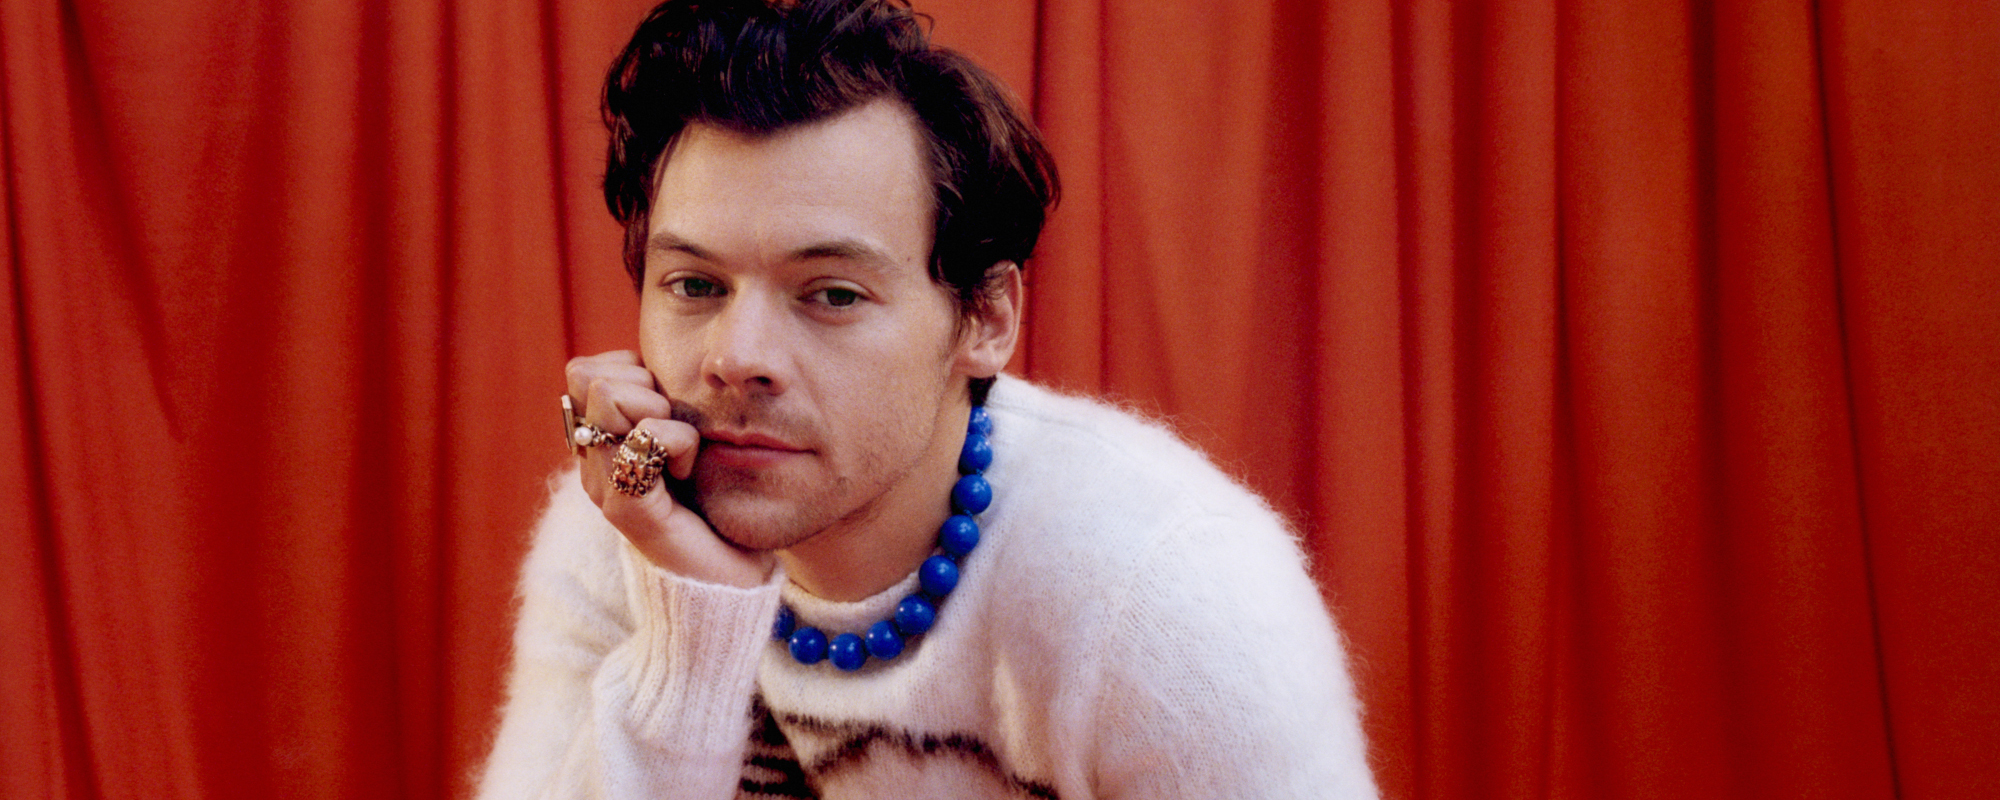 Harry Styles Penned the Theme Song For Impending Film ‘Don’t Worry Darling’